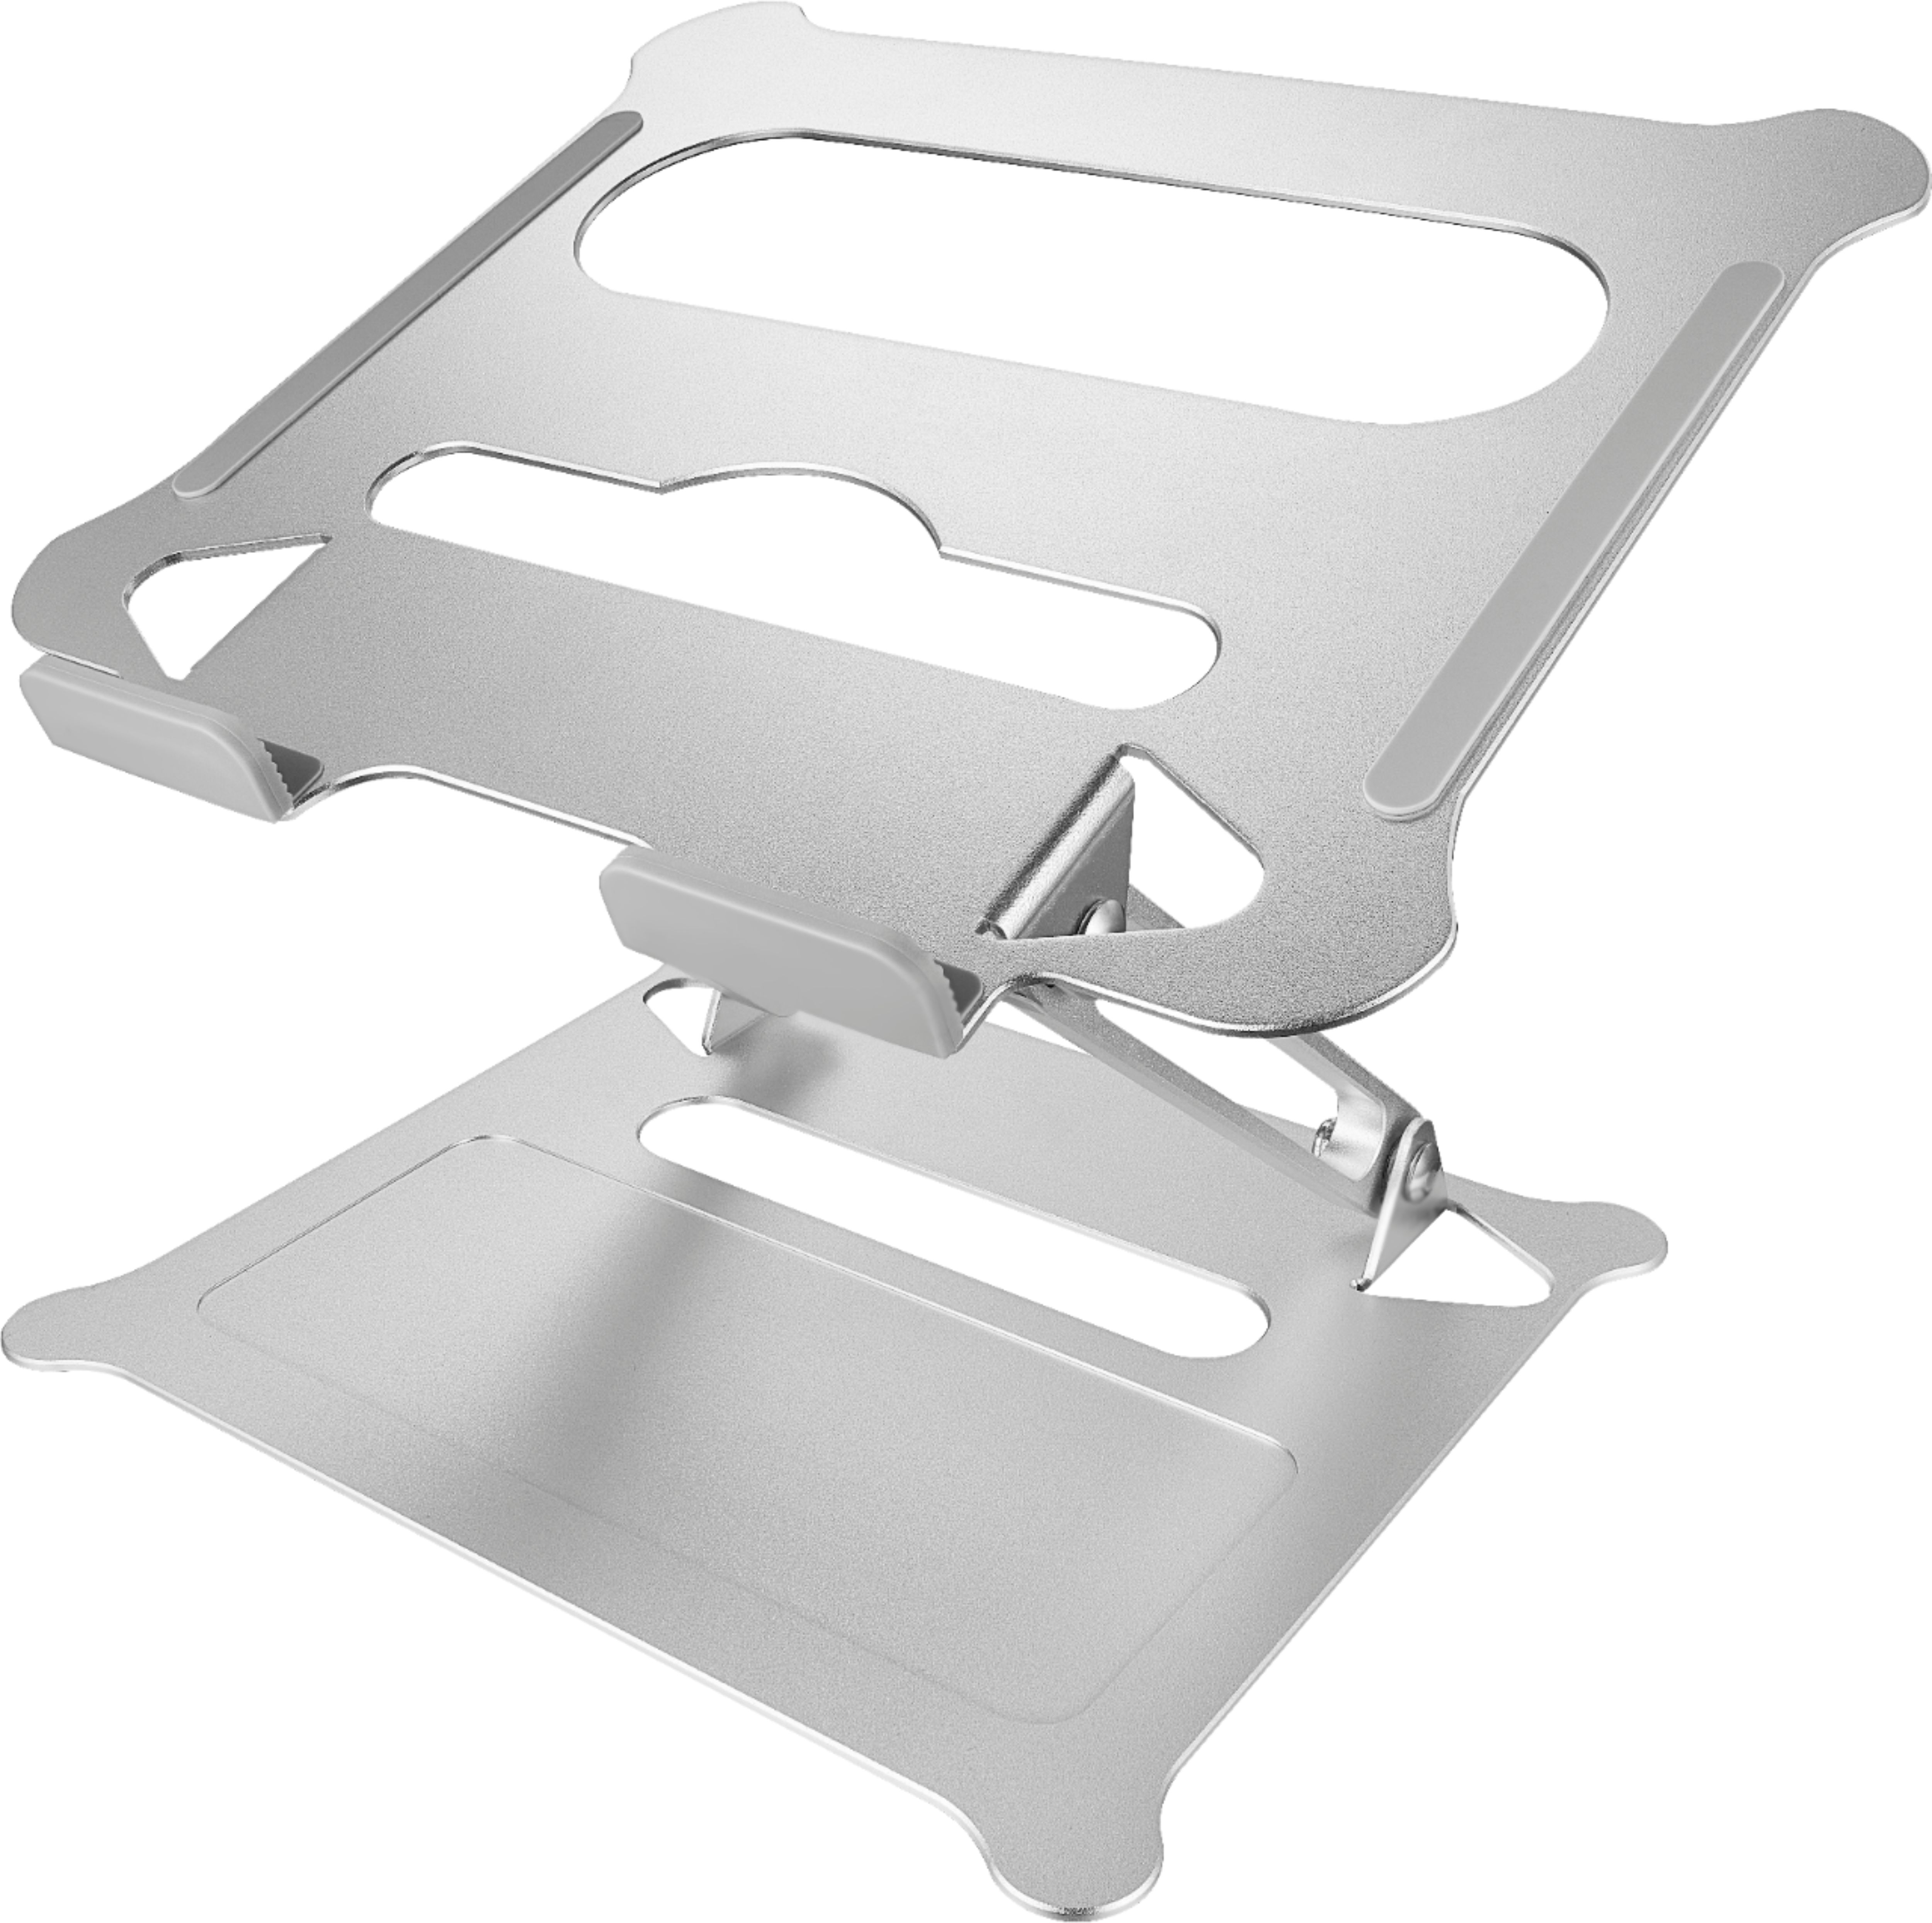 Angle View: Insignia™ - Ergonomic Laptop Stand - Silver